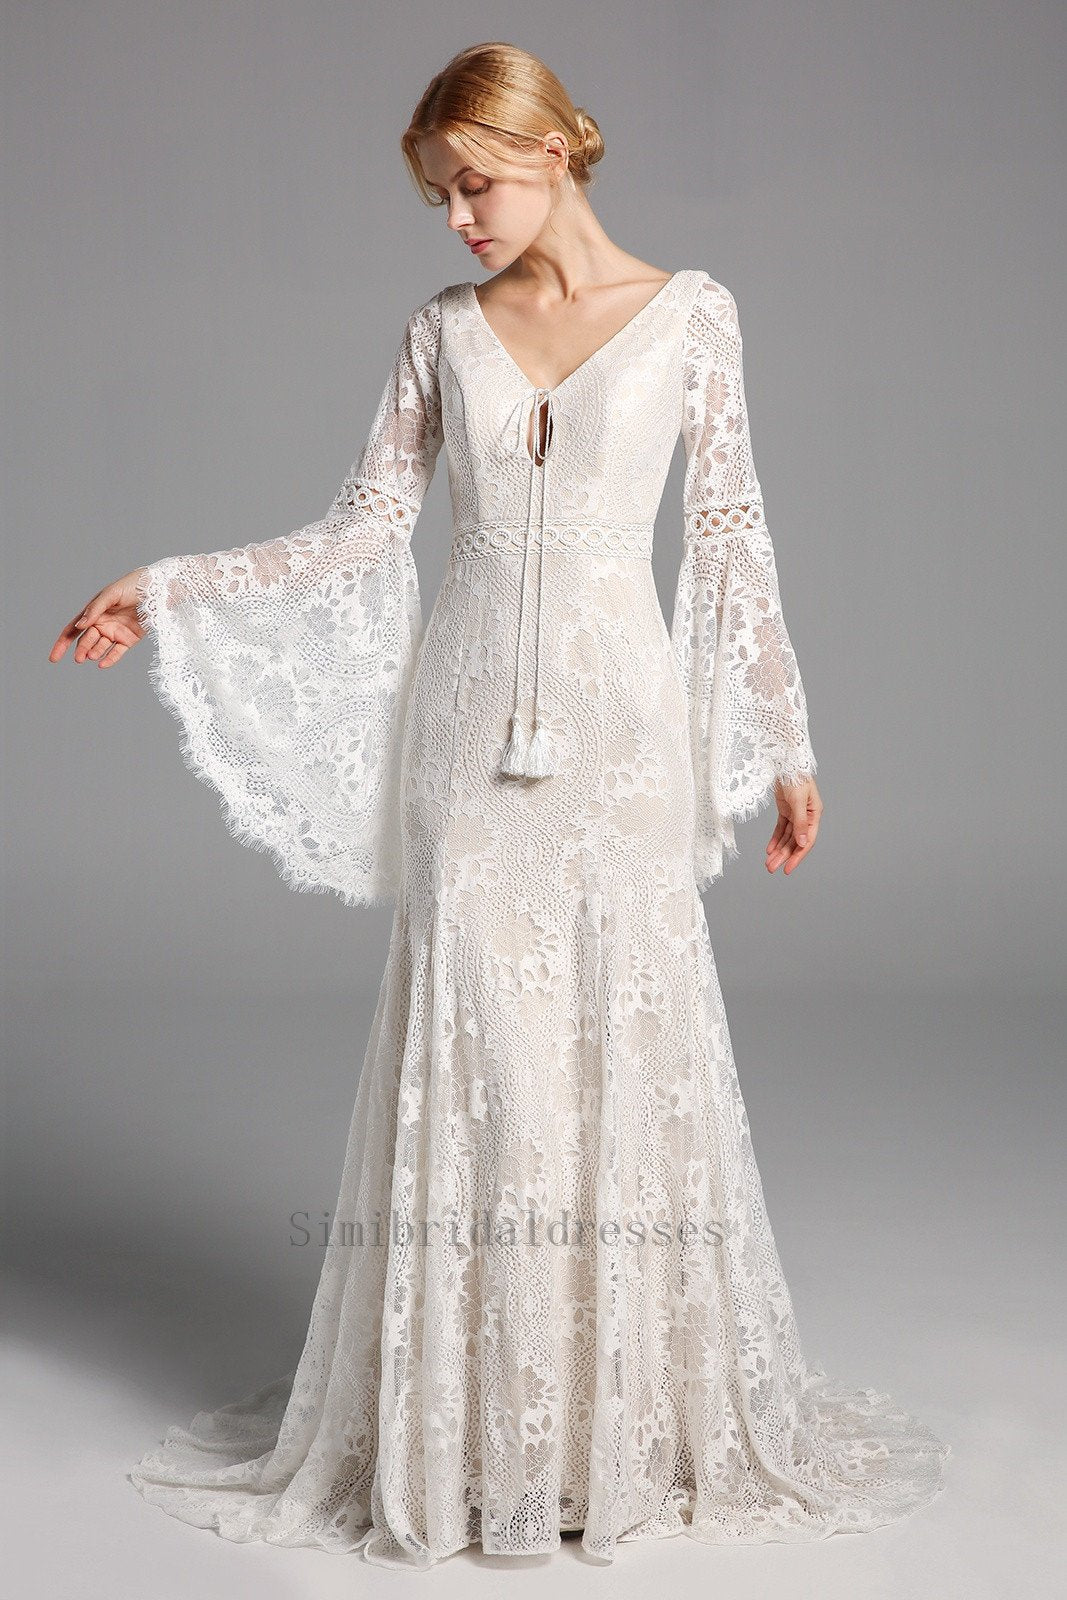 New Arrival Boho Long Sleeves Lace Beach Wedding Dresses Chic Bridal Gowns Y0133